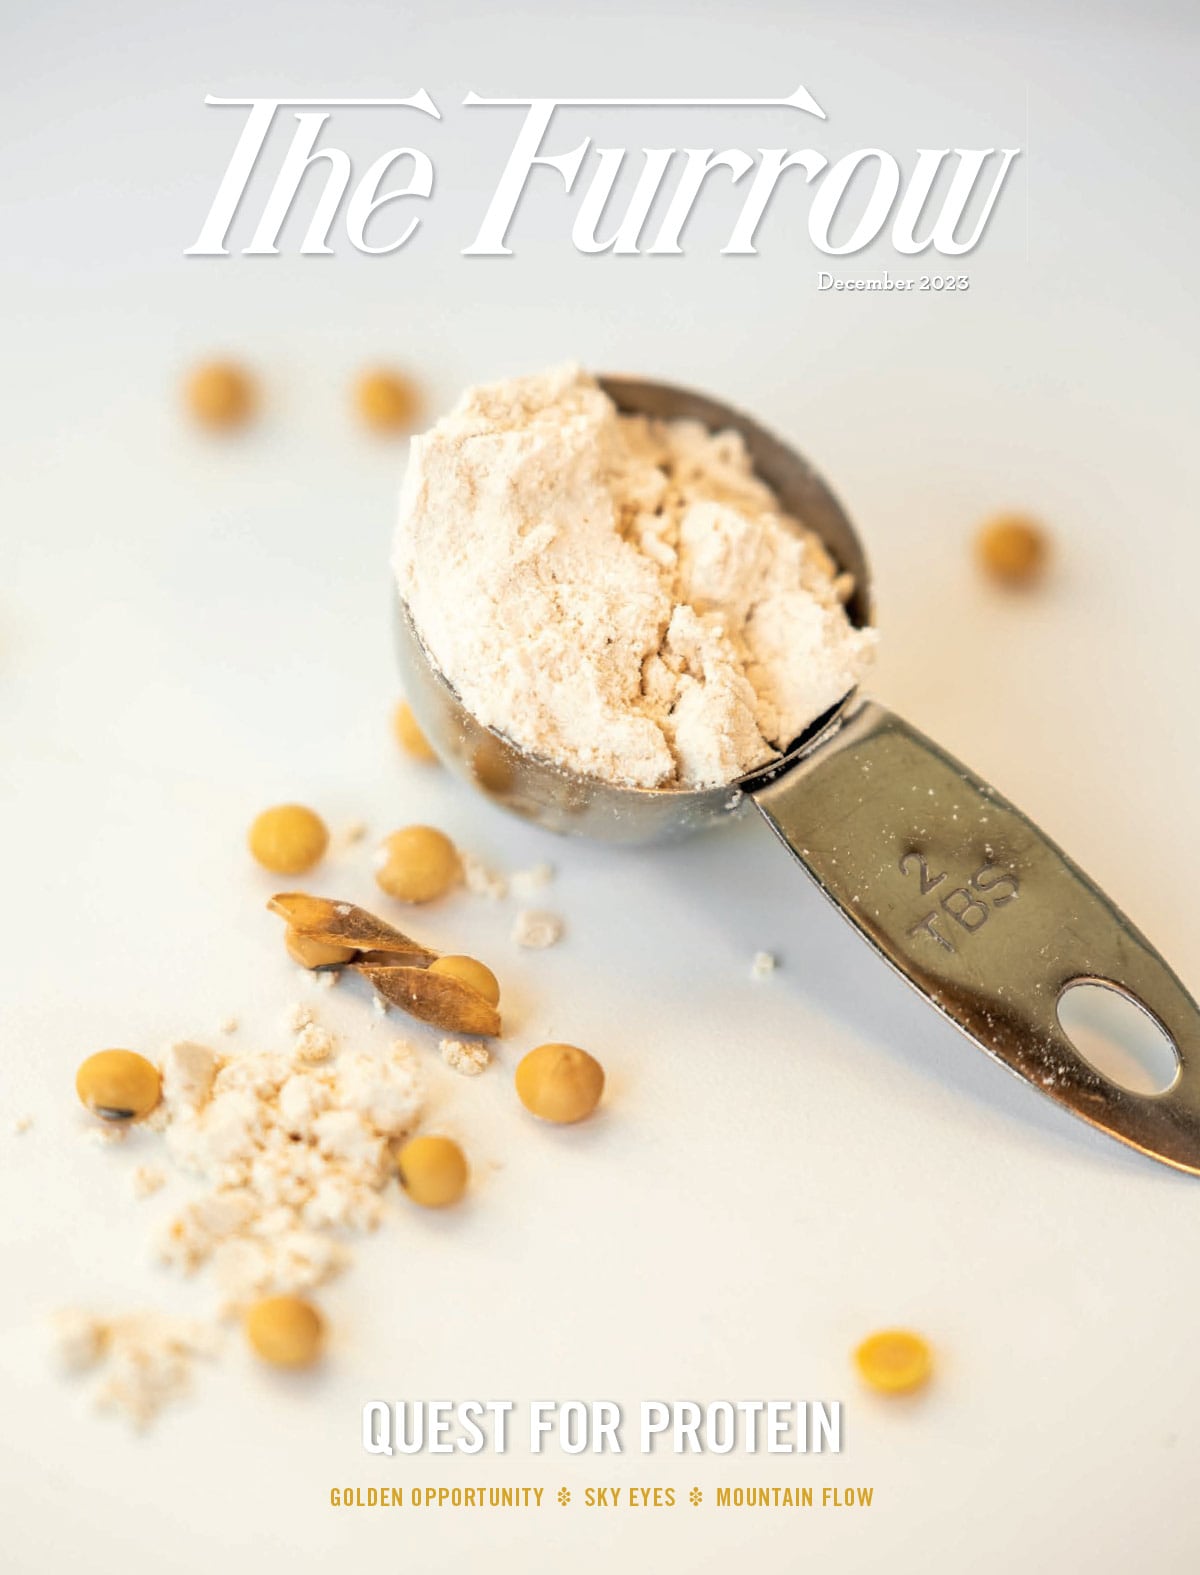 soy flour in a two tablespoon measuring cup with soybeans strewn around on an off white background